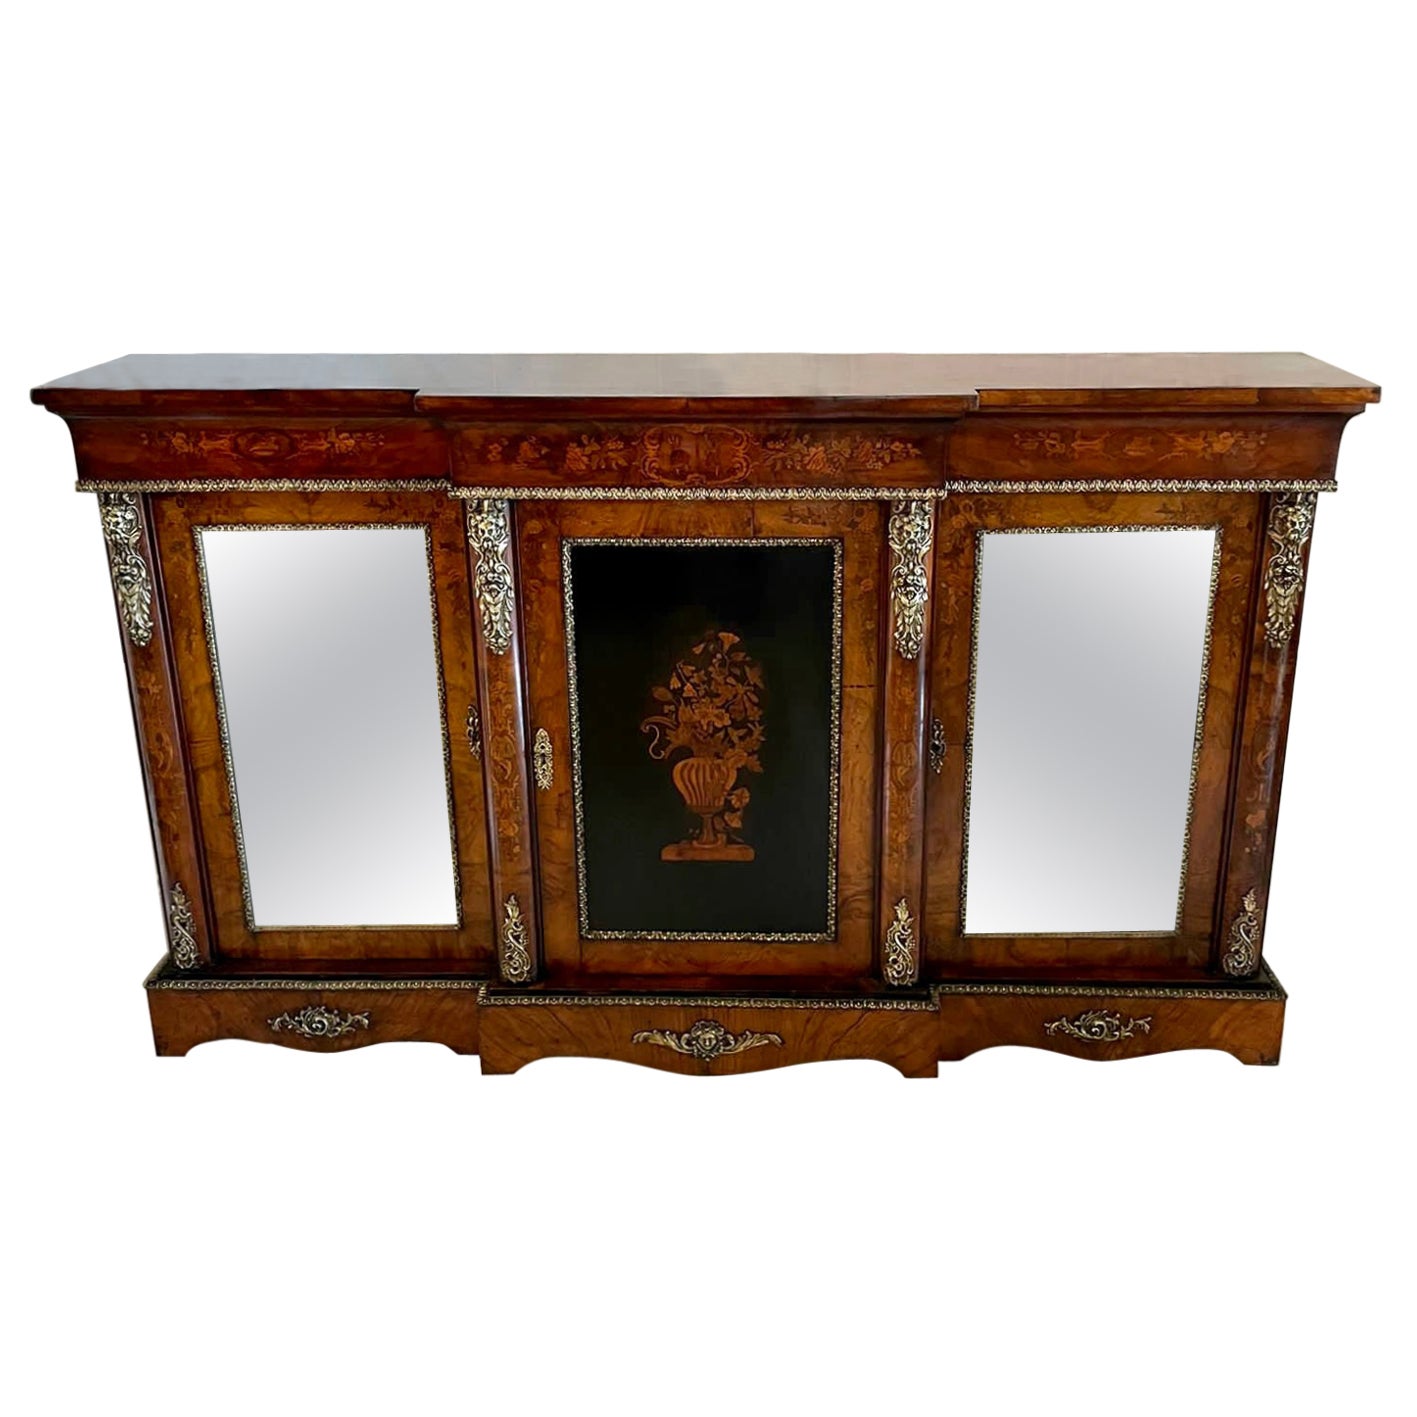 Outstanding Large Antique Inlaid Floral Marquetry Burr Walnut Credenza/Sideboard